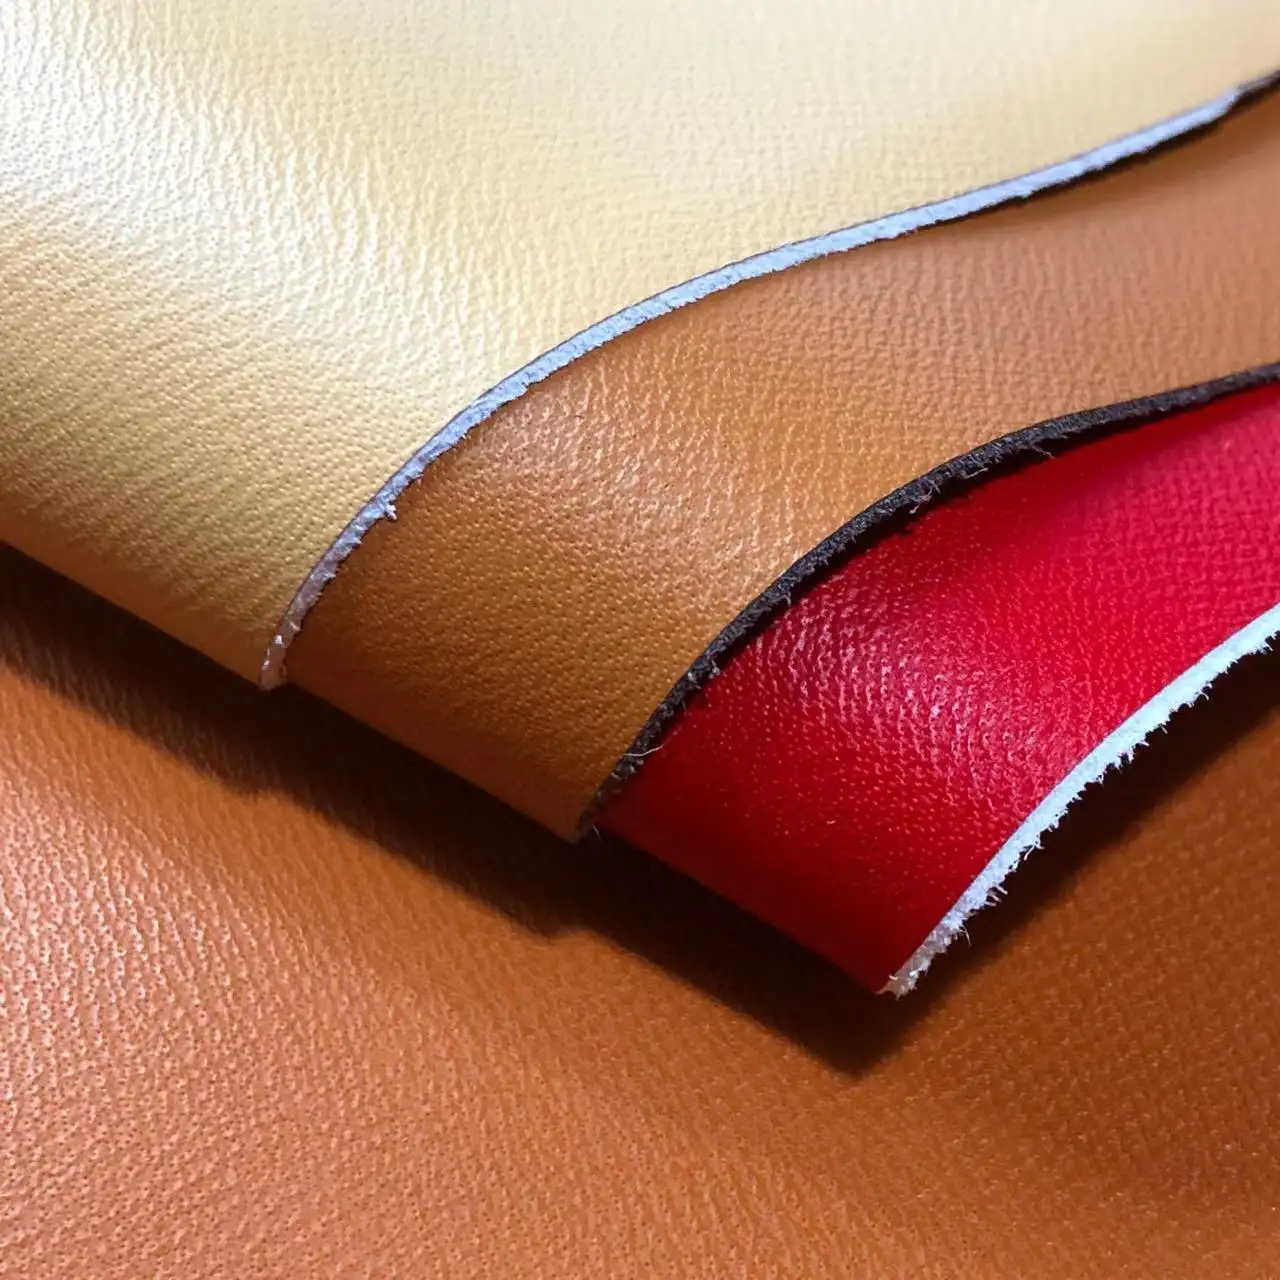 Synthetic Leather Dermal grain leather microfiber Rolls For Furniture Sofa Shoes Bag Car seat